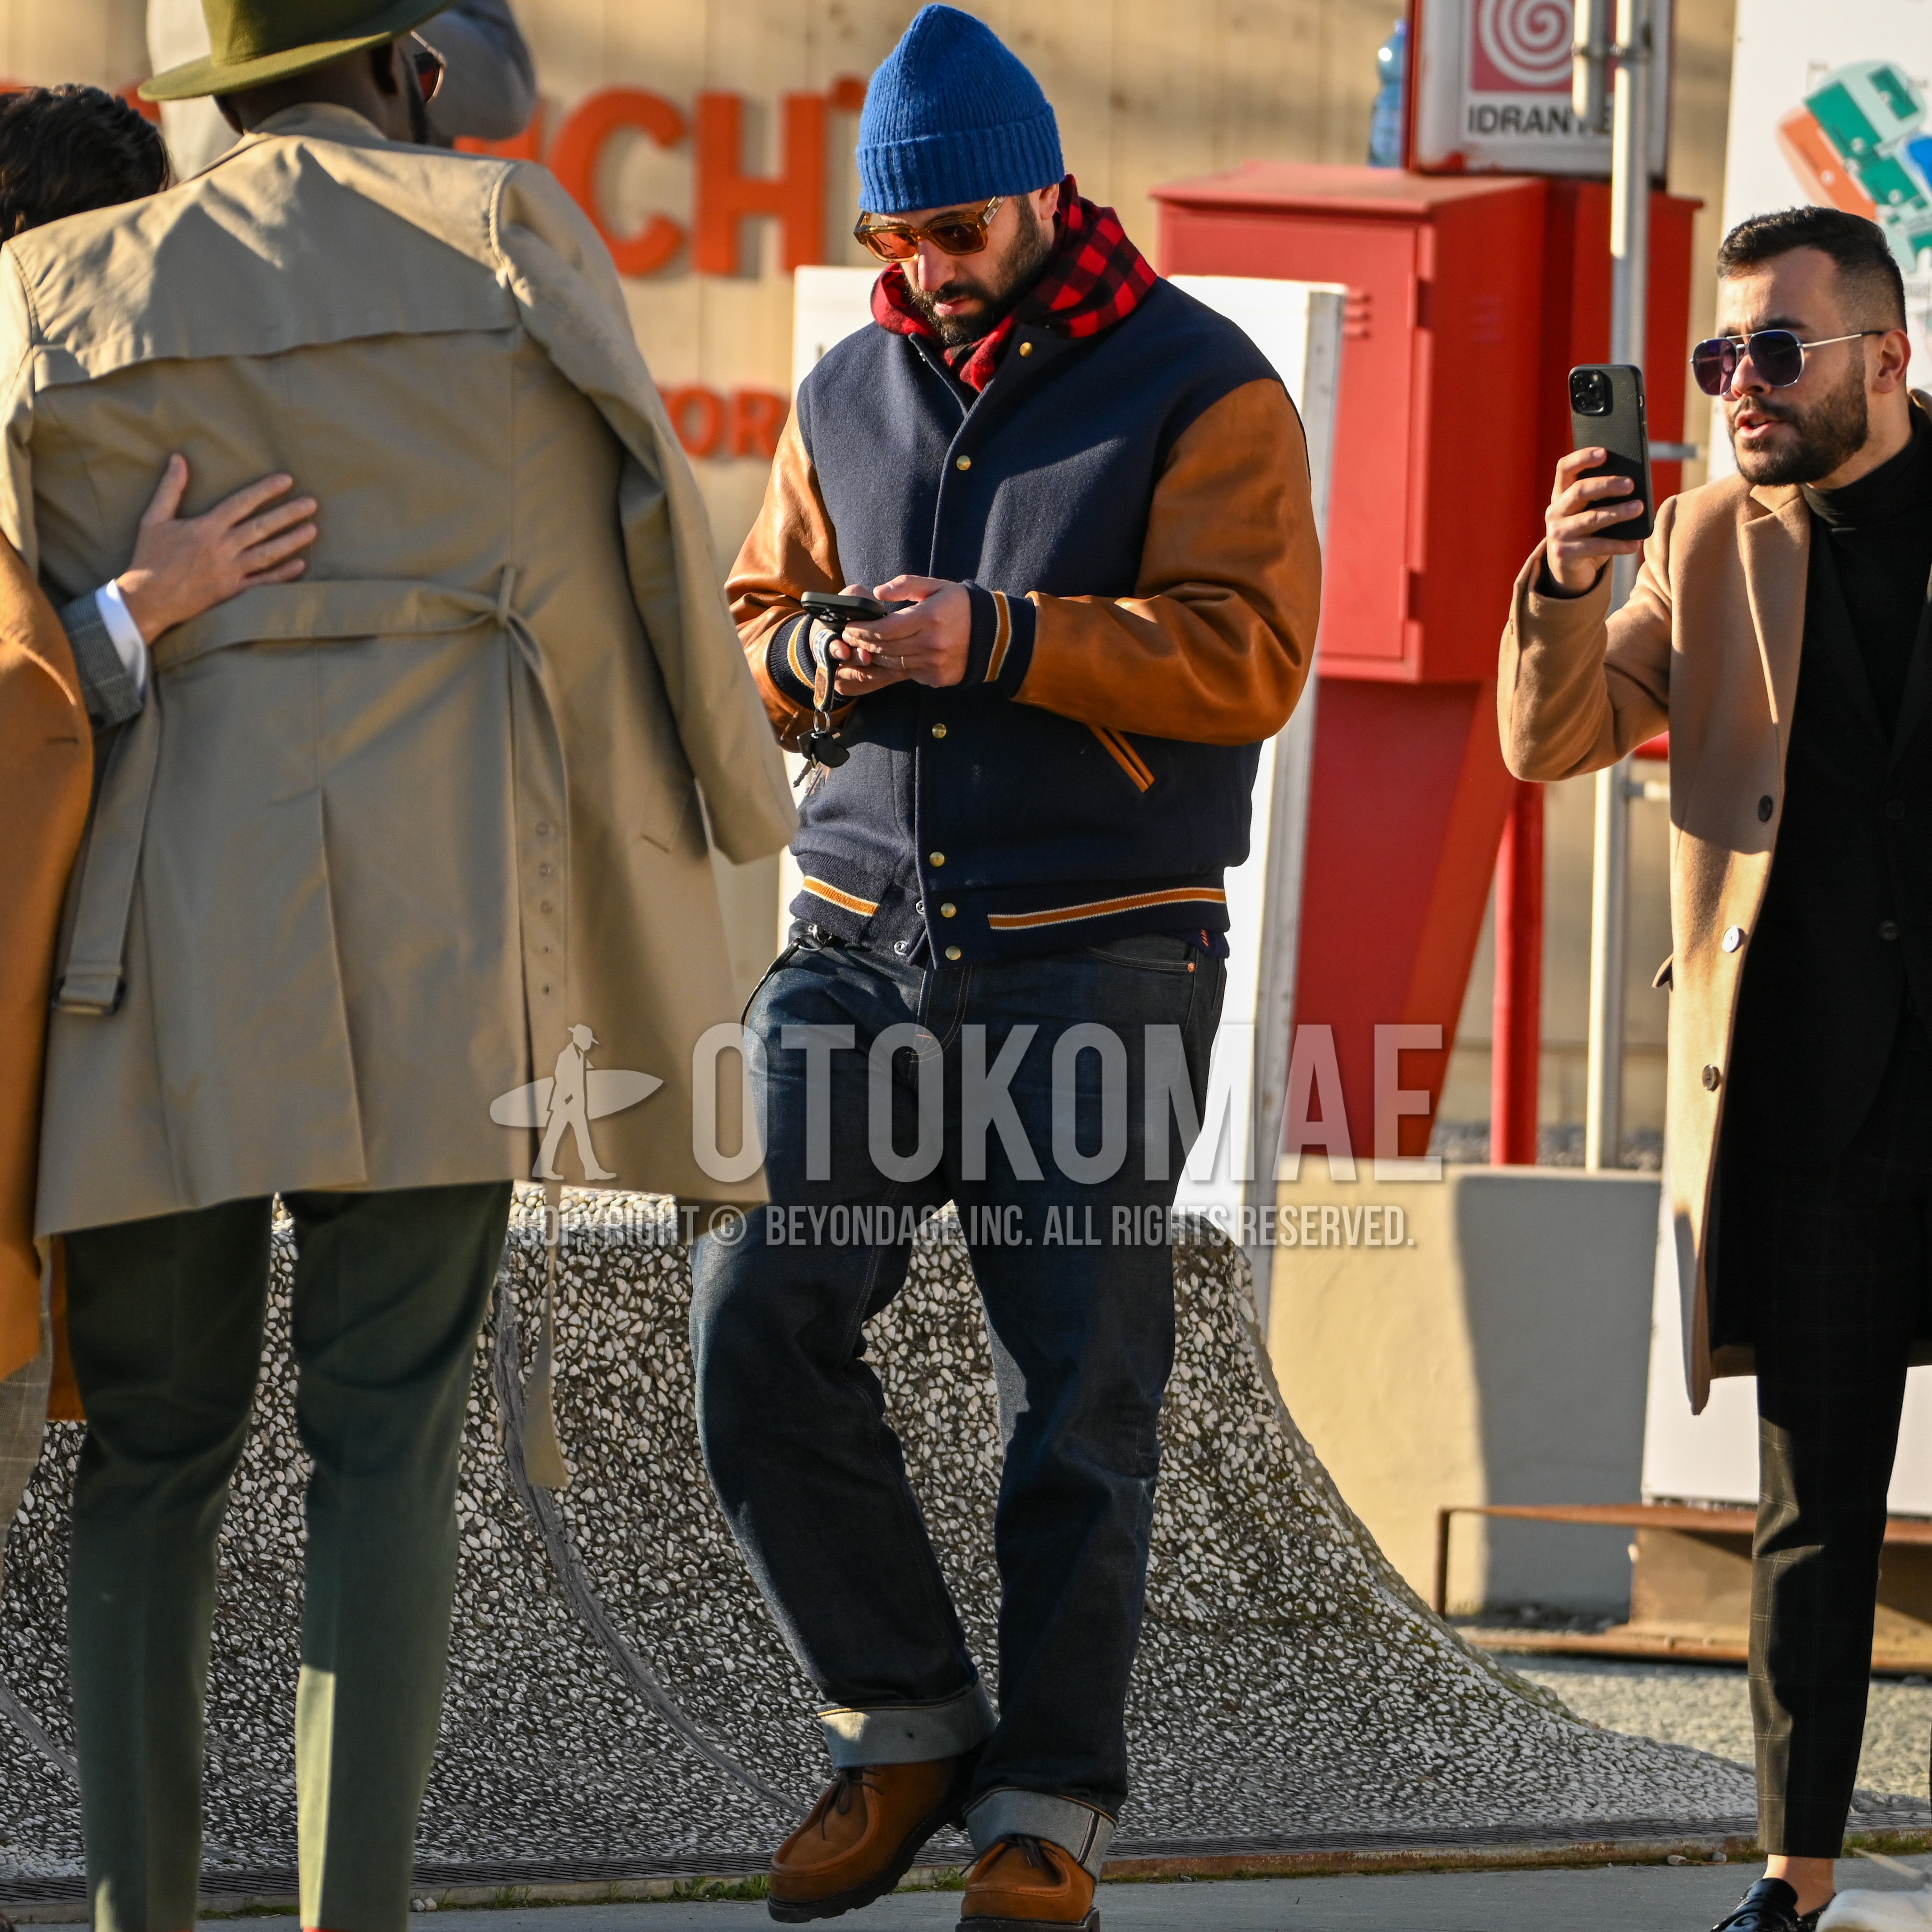 Men's autumn winter outfit with blue plain knit cap, clear plain sunglasses, red black check scarf, navy brown outerwear stadium jacket, plain denim/jeans, brown  loafers leather shoes.